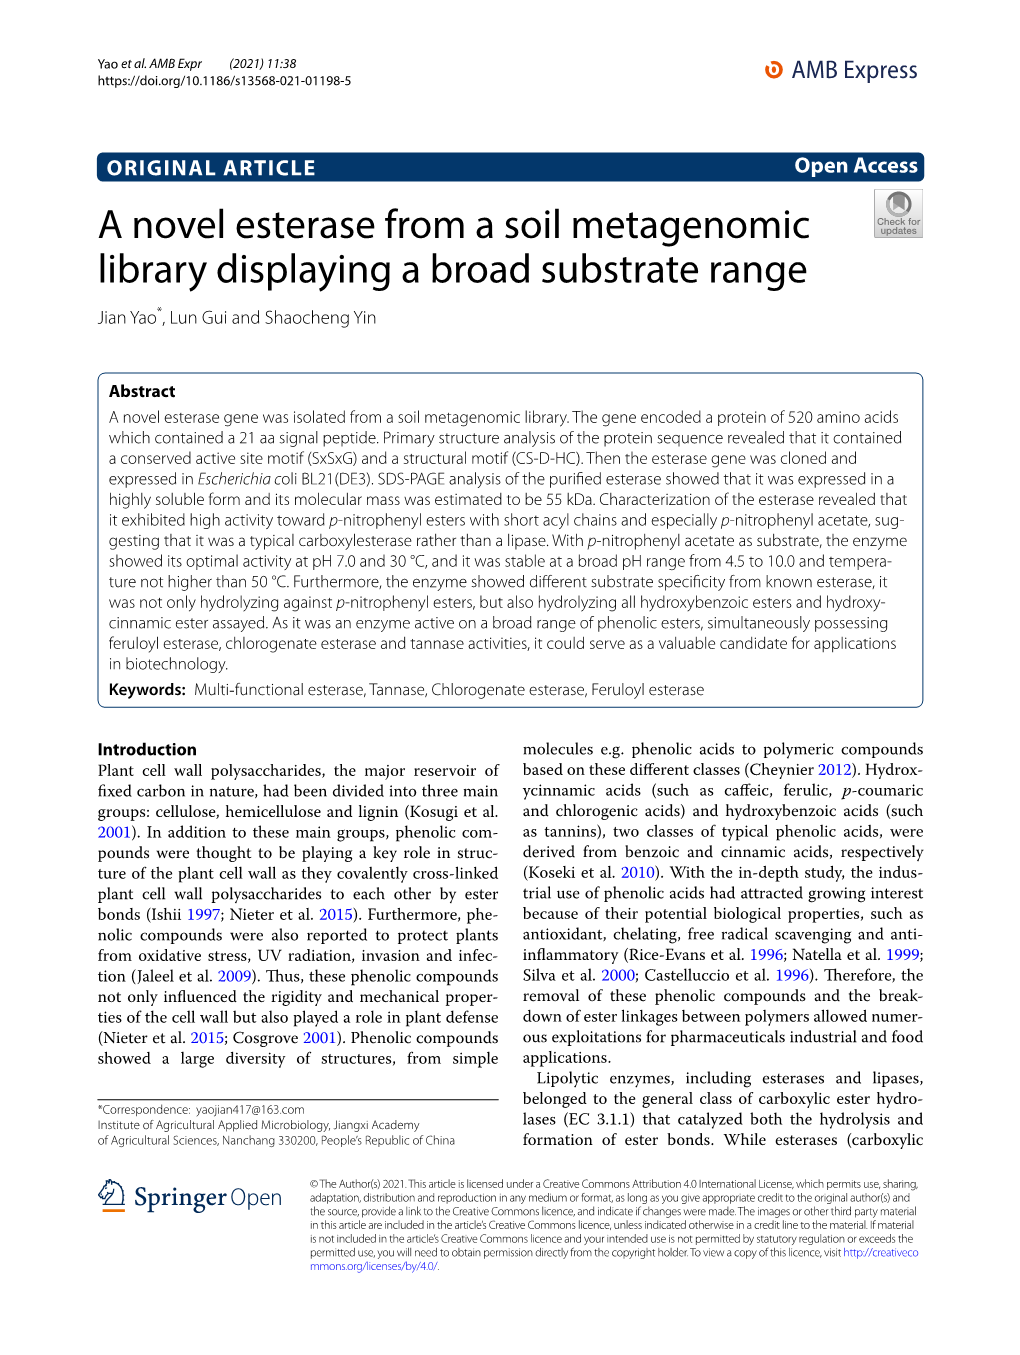 A Novel Esterase from a Soil Metagenomic Library Displaying a Broad Substrate Range Jian Yao*, Lun Gui and Shaocheng Yin